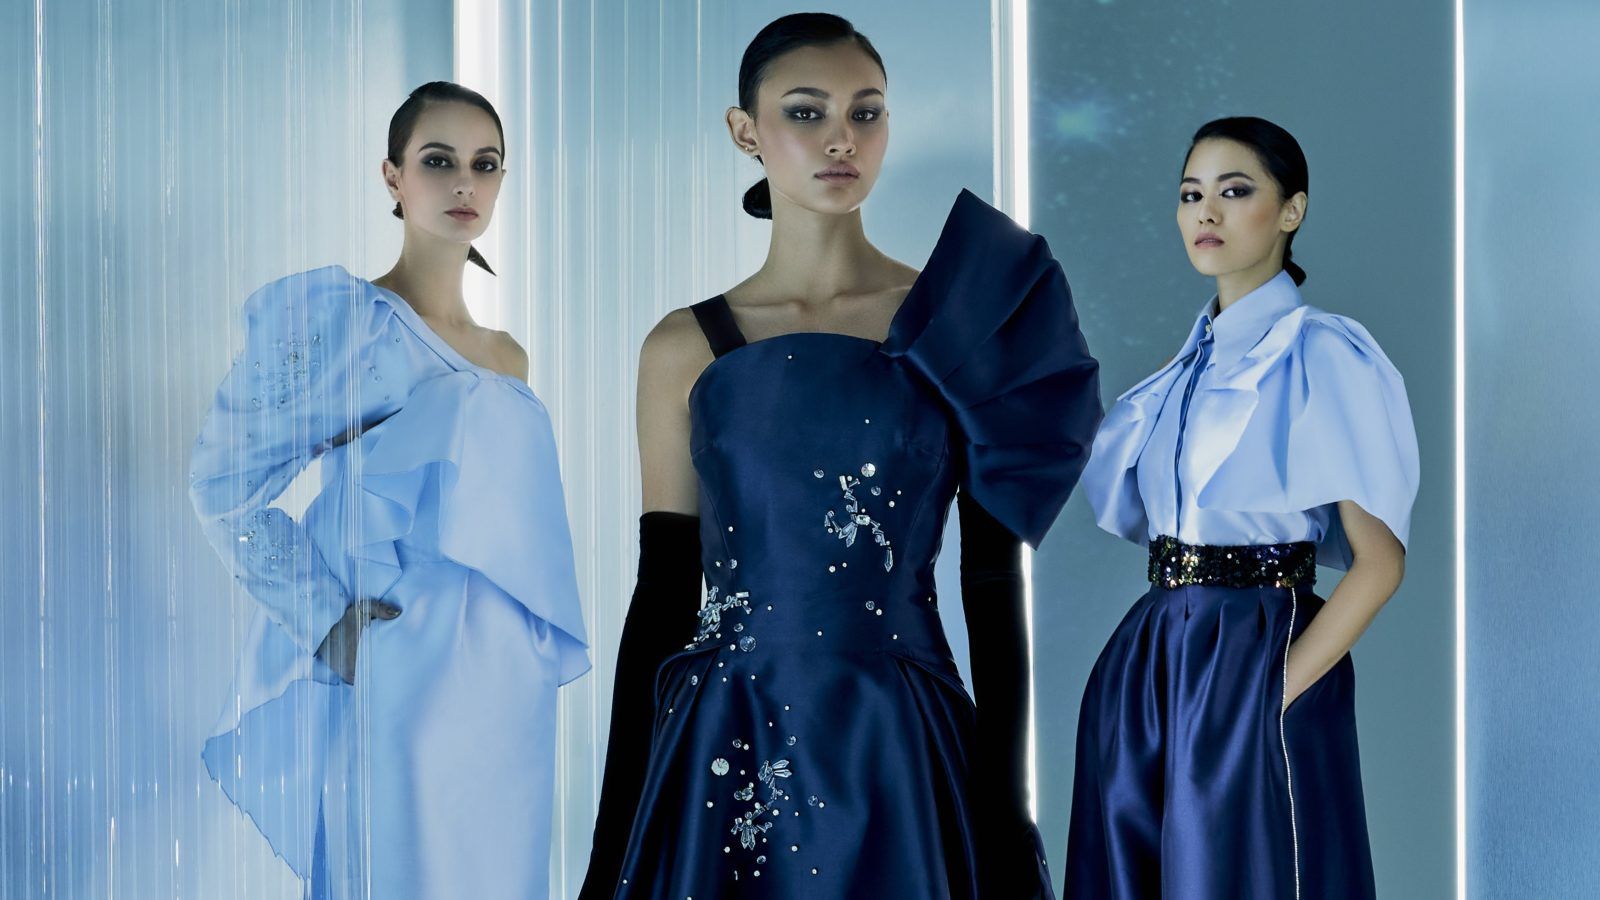 Khoon Hooi's futuristic Fall 2021 Collection takes inspiration from space